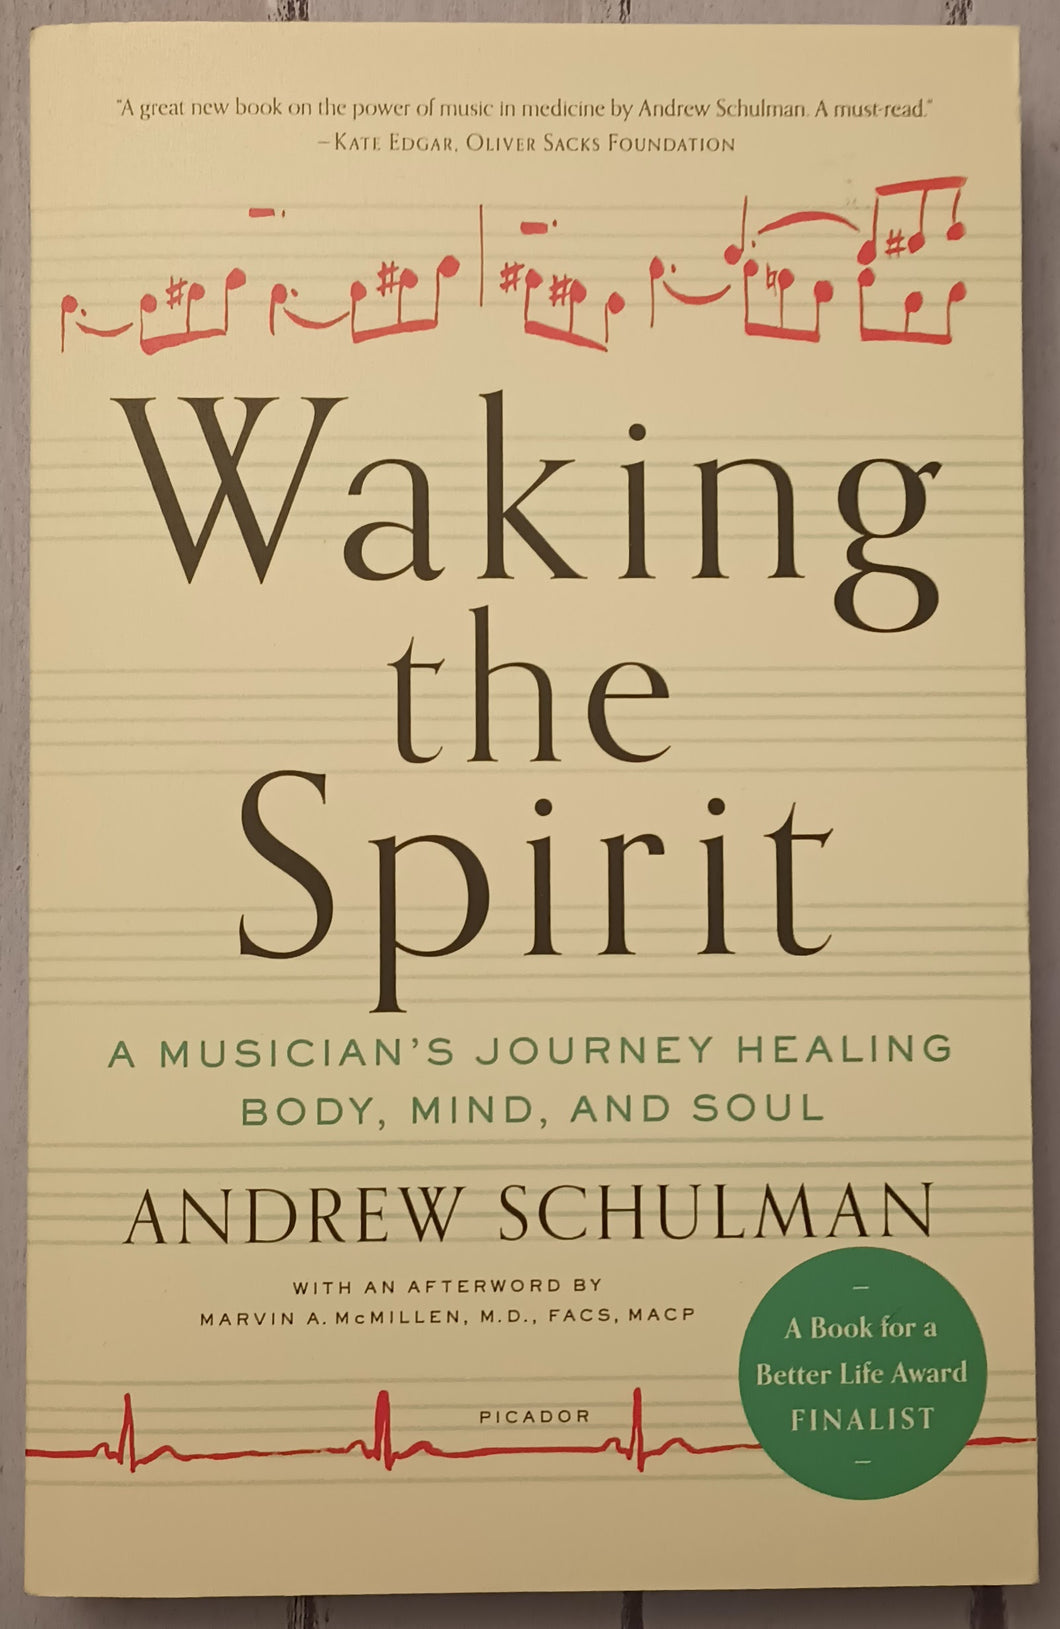 Waking the Spirit: A Musician's Journey Healing Body, Mind, and Soul